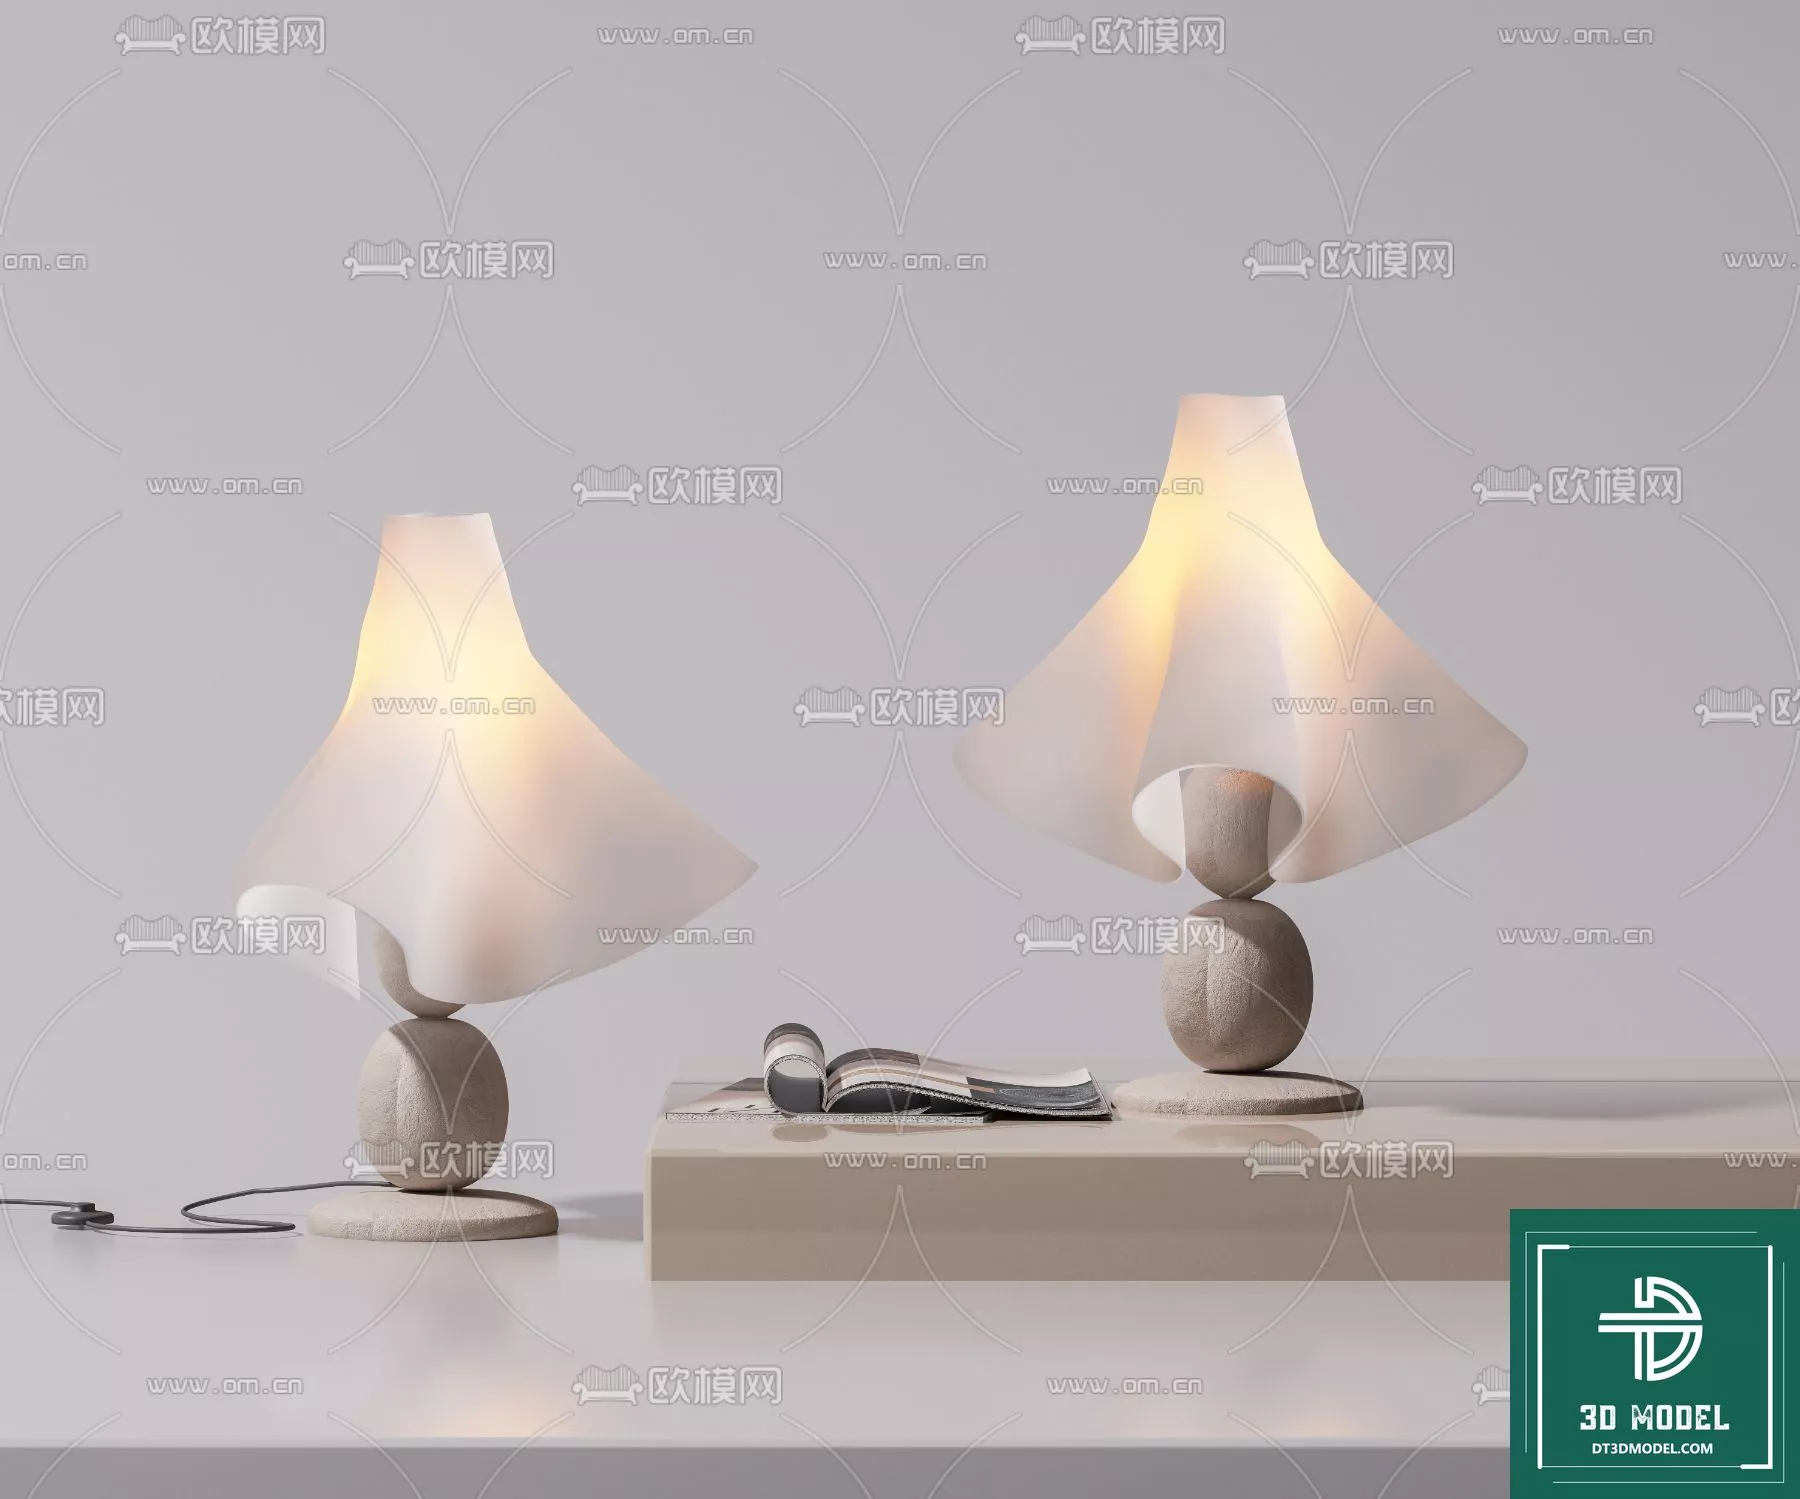 MODERN TABLE LAMP - SKETCHUP 3D MODEL - VRAY OR ENSCAPE - ID14558